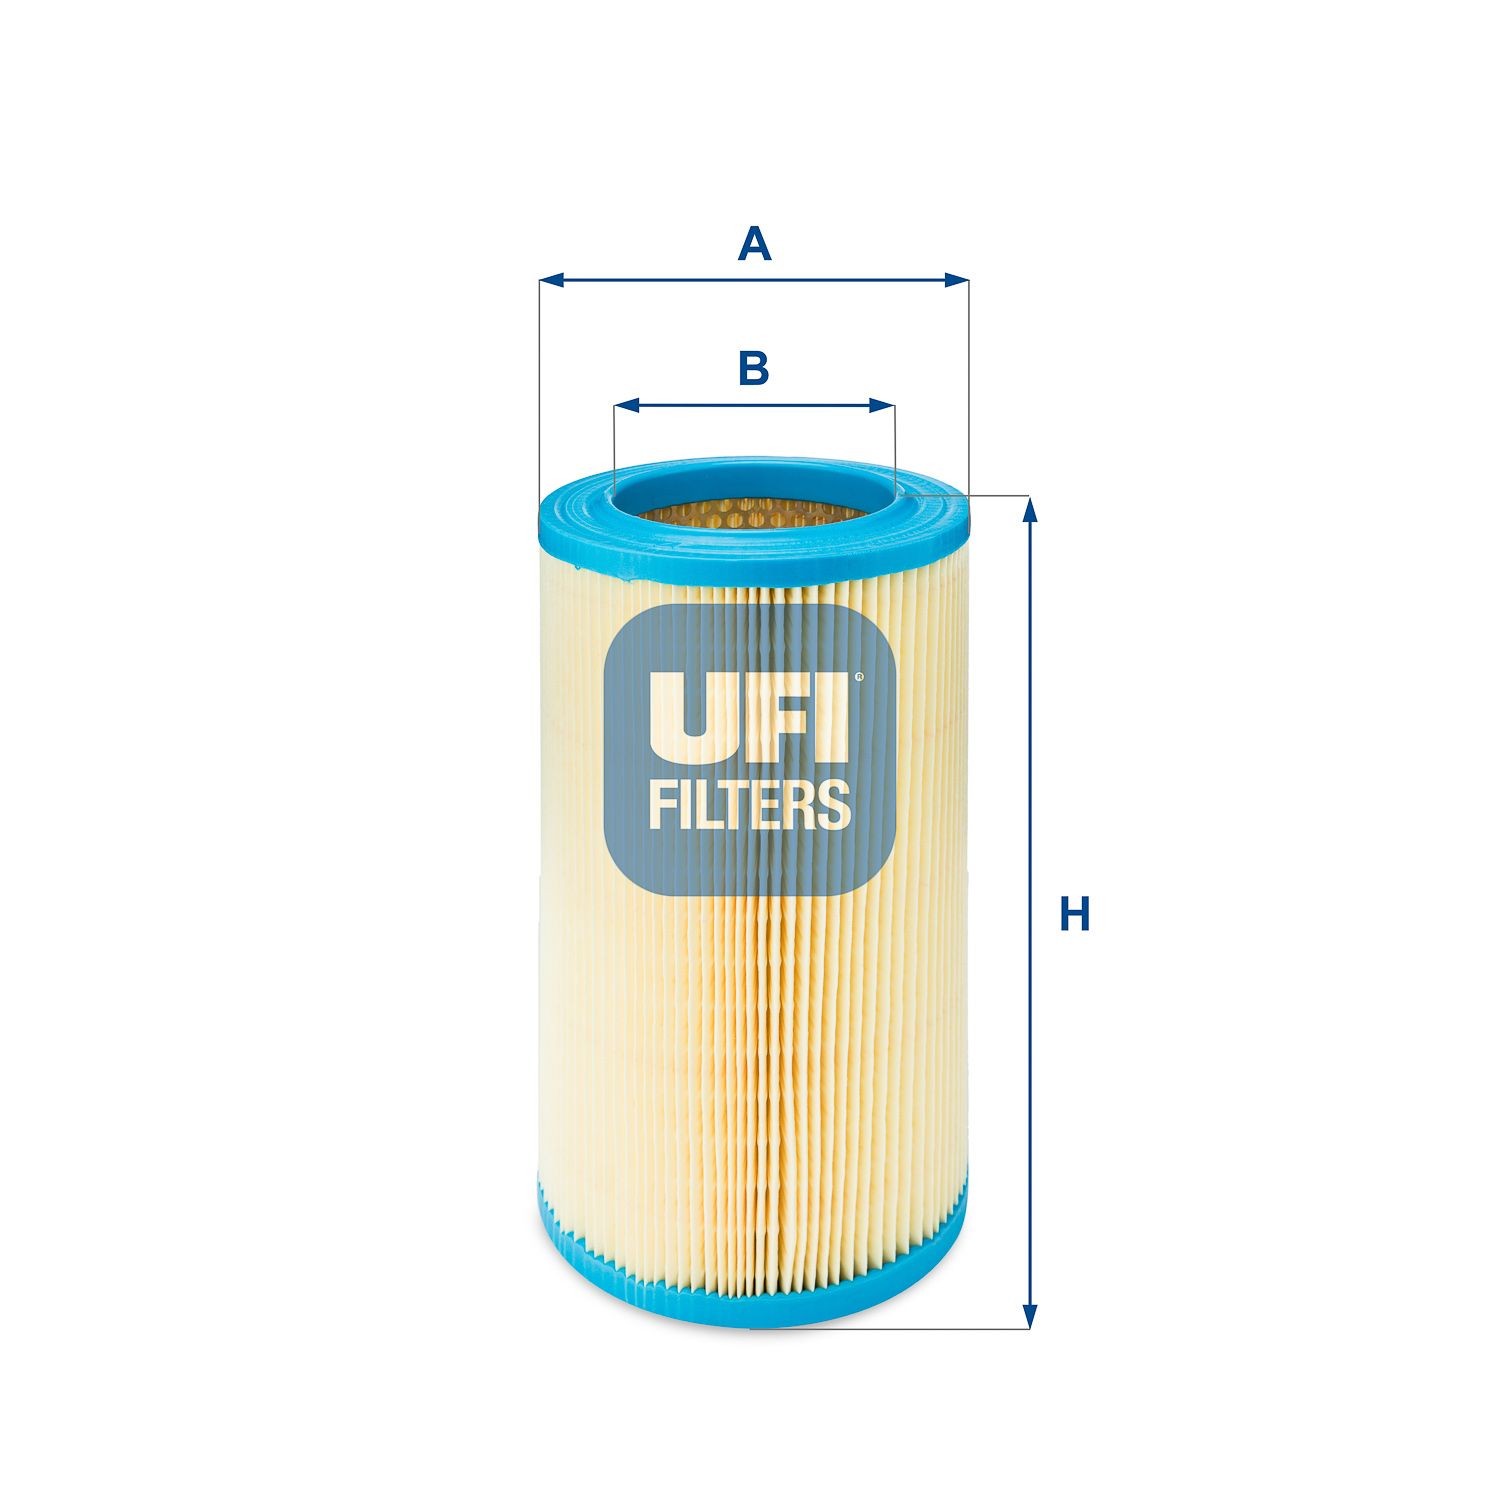 Air filter 27.630.00 from UFI